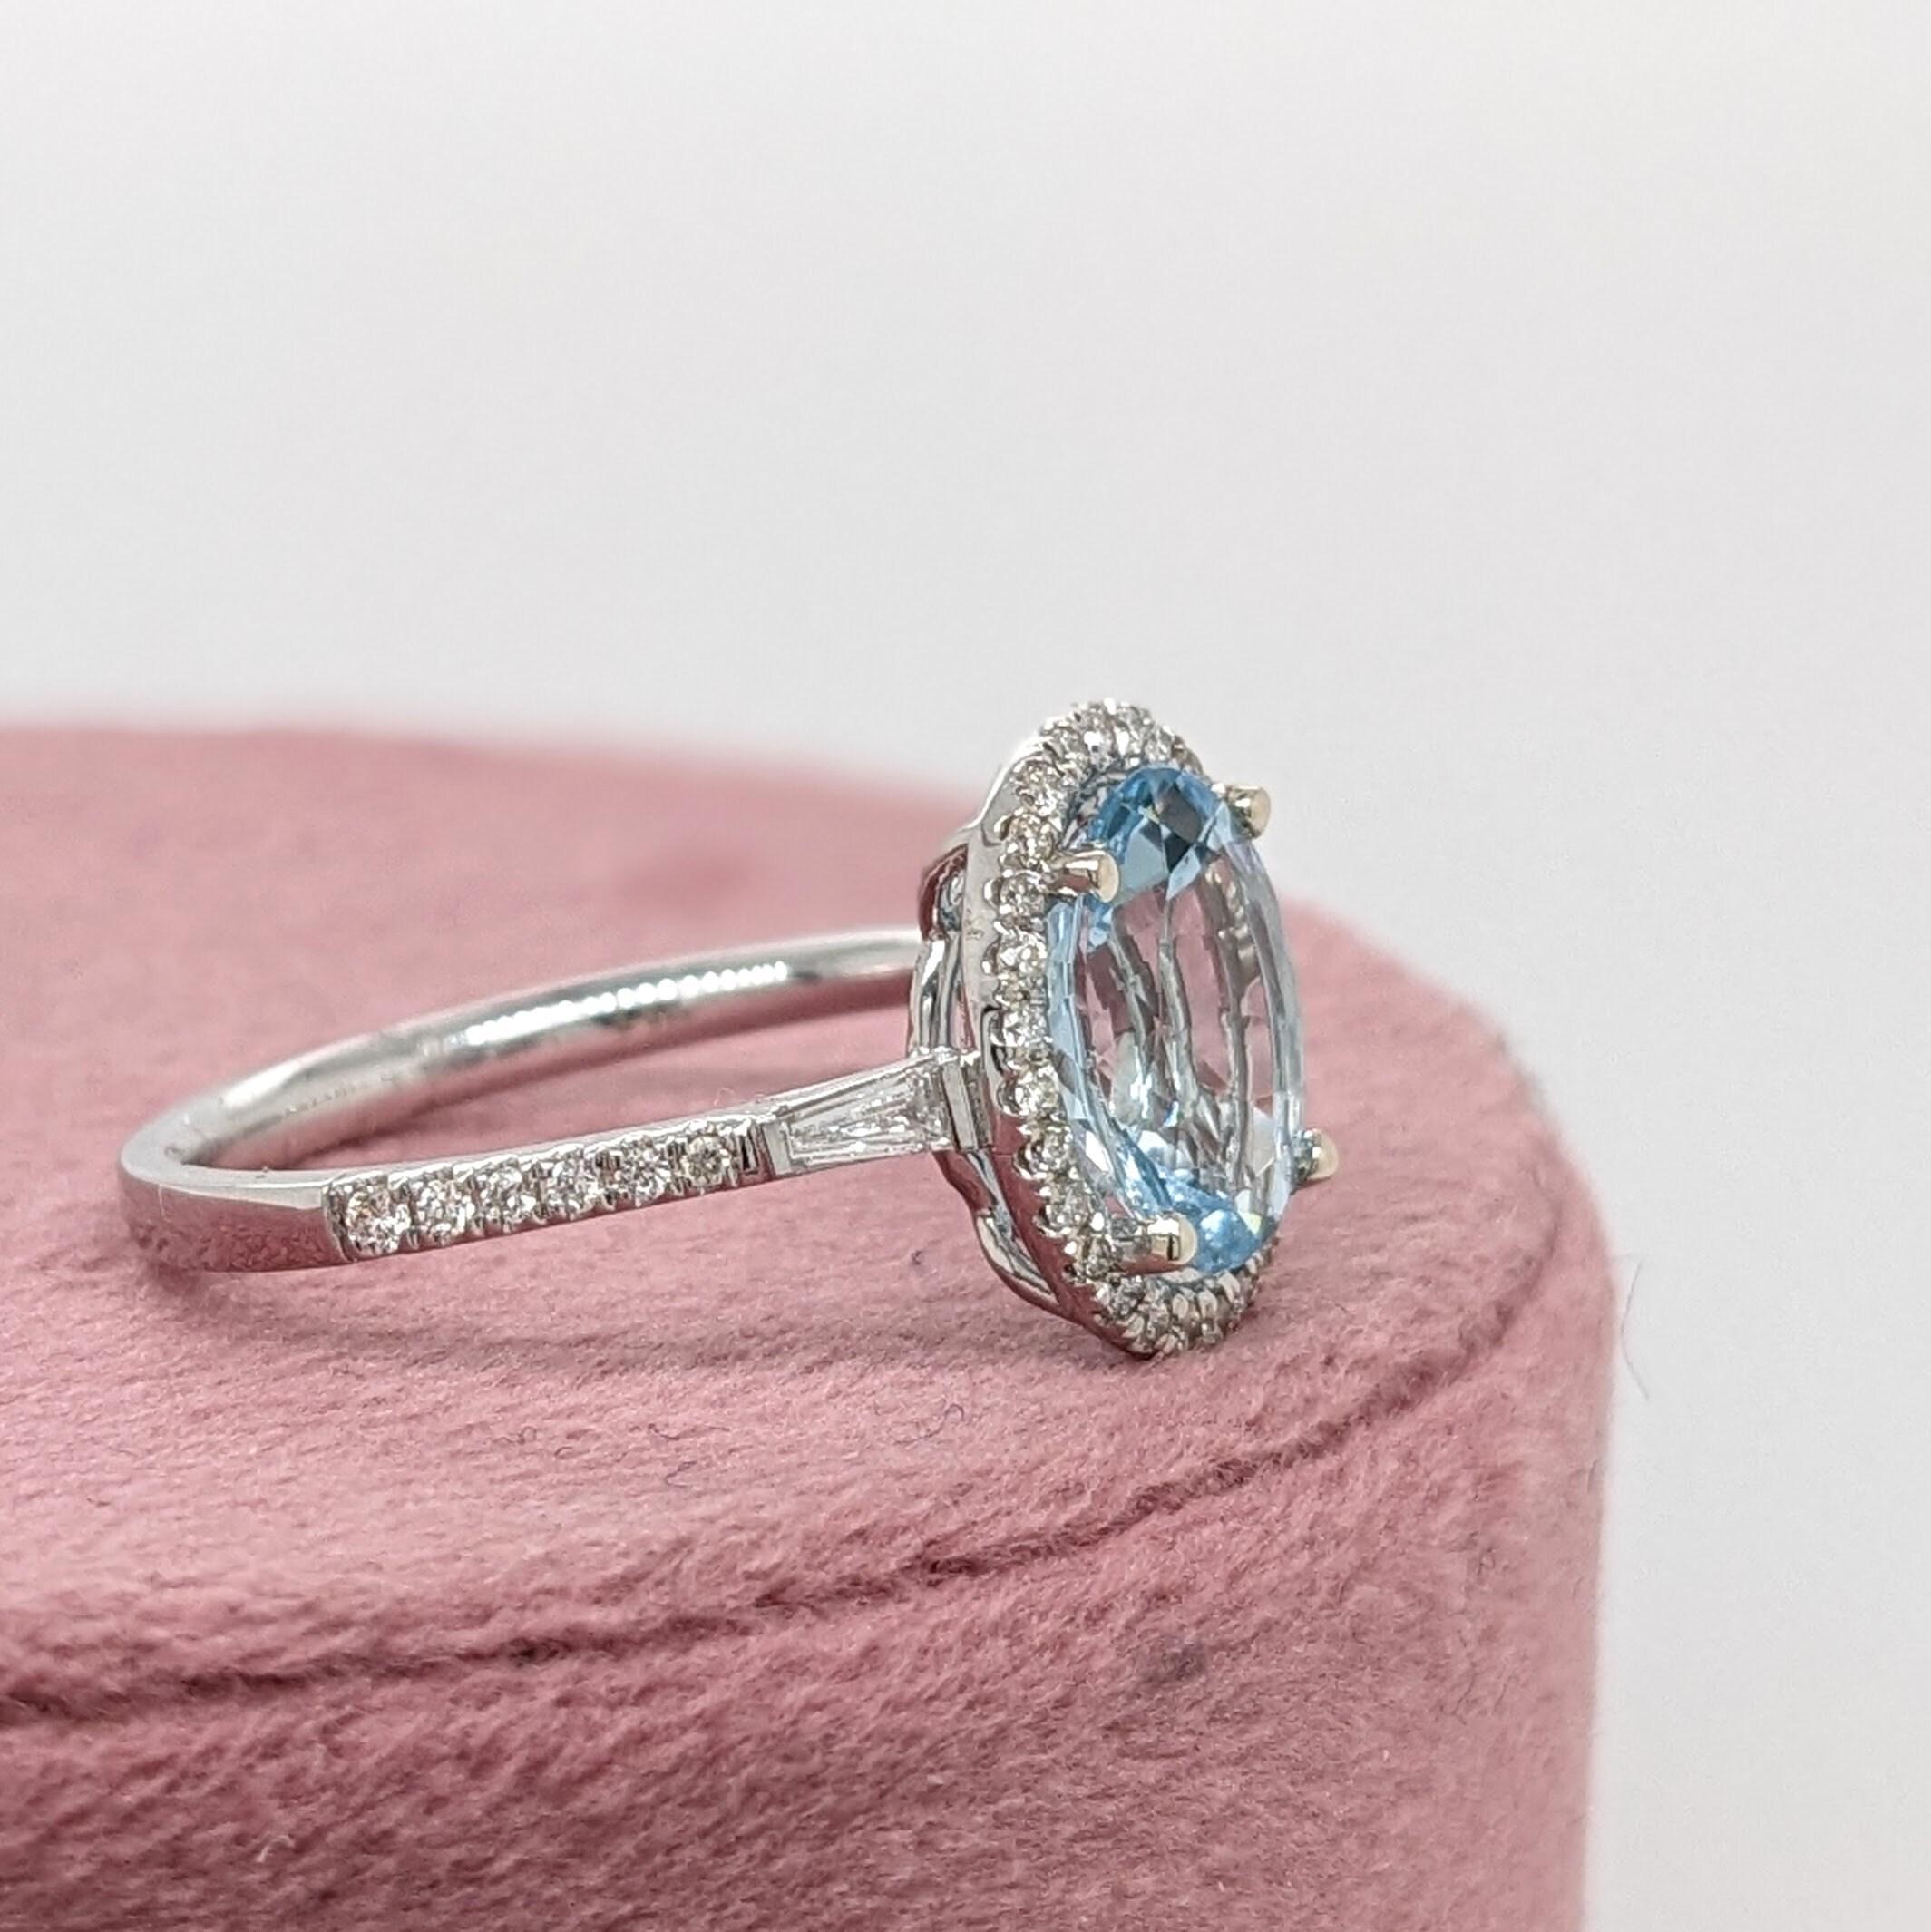 Oval Cut Beautiful Aquamarine Ring in Solid 14K White Gold with a Halo of Natural Diamond